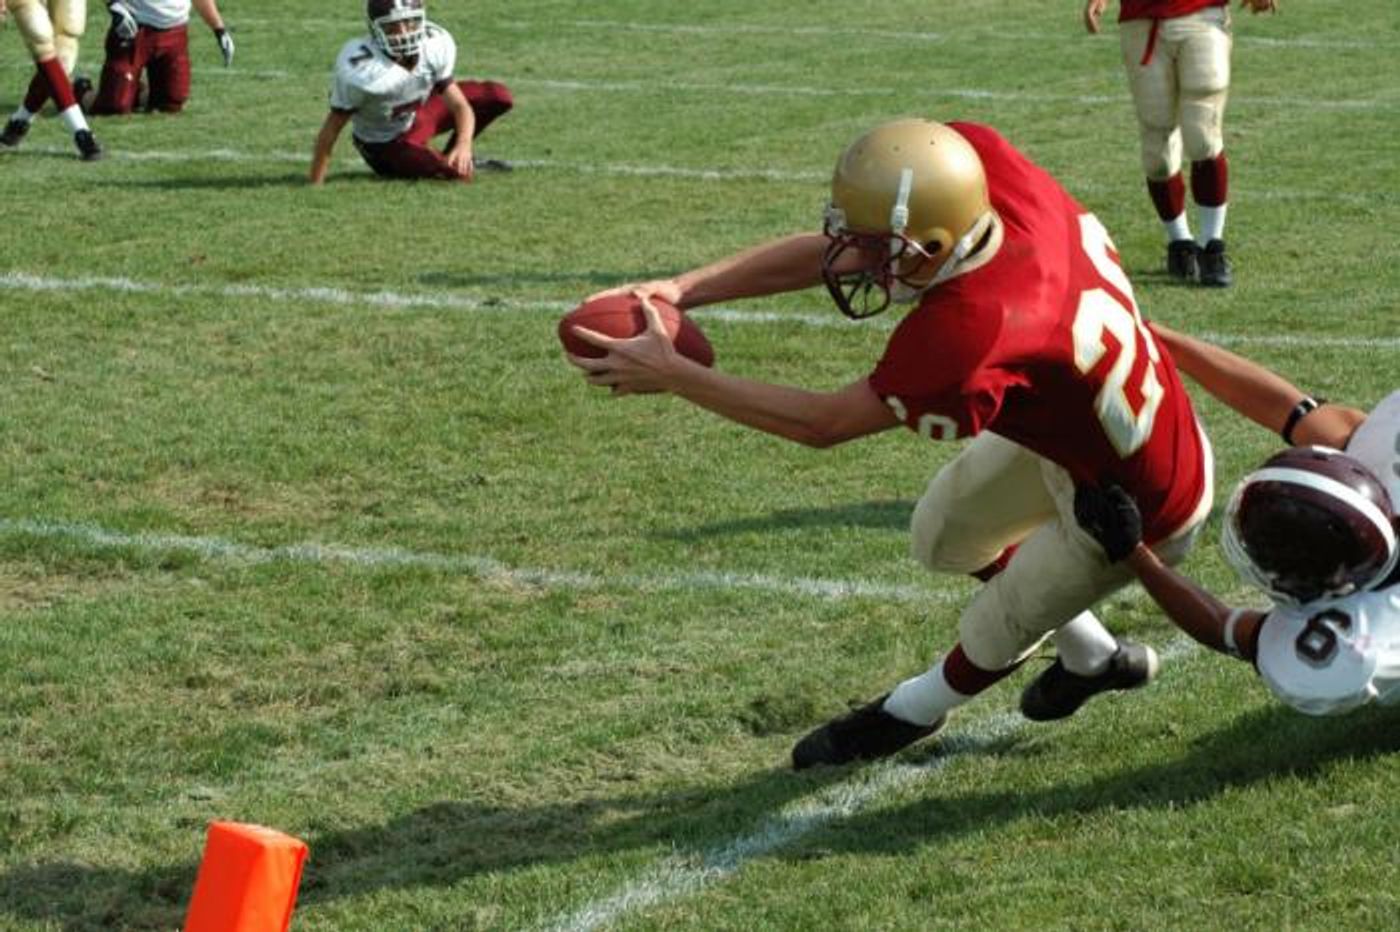 Football players who suffer concussions early in life can pay a steep price later.